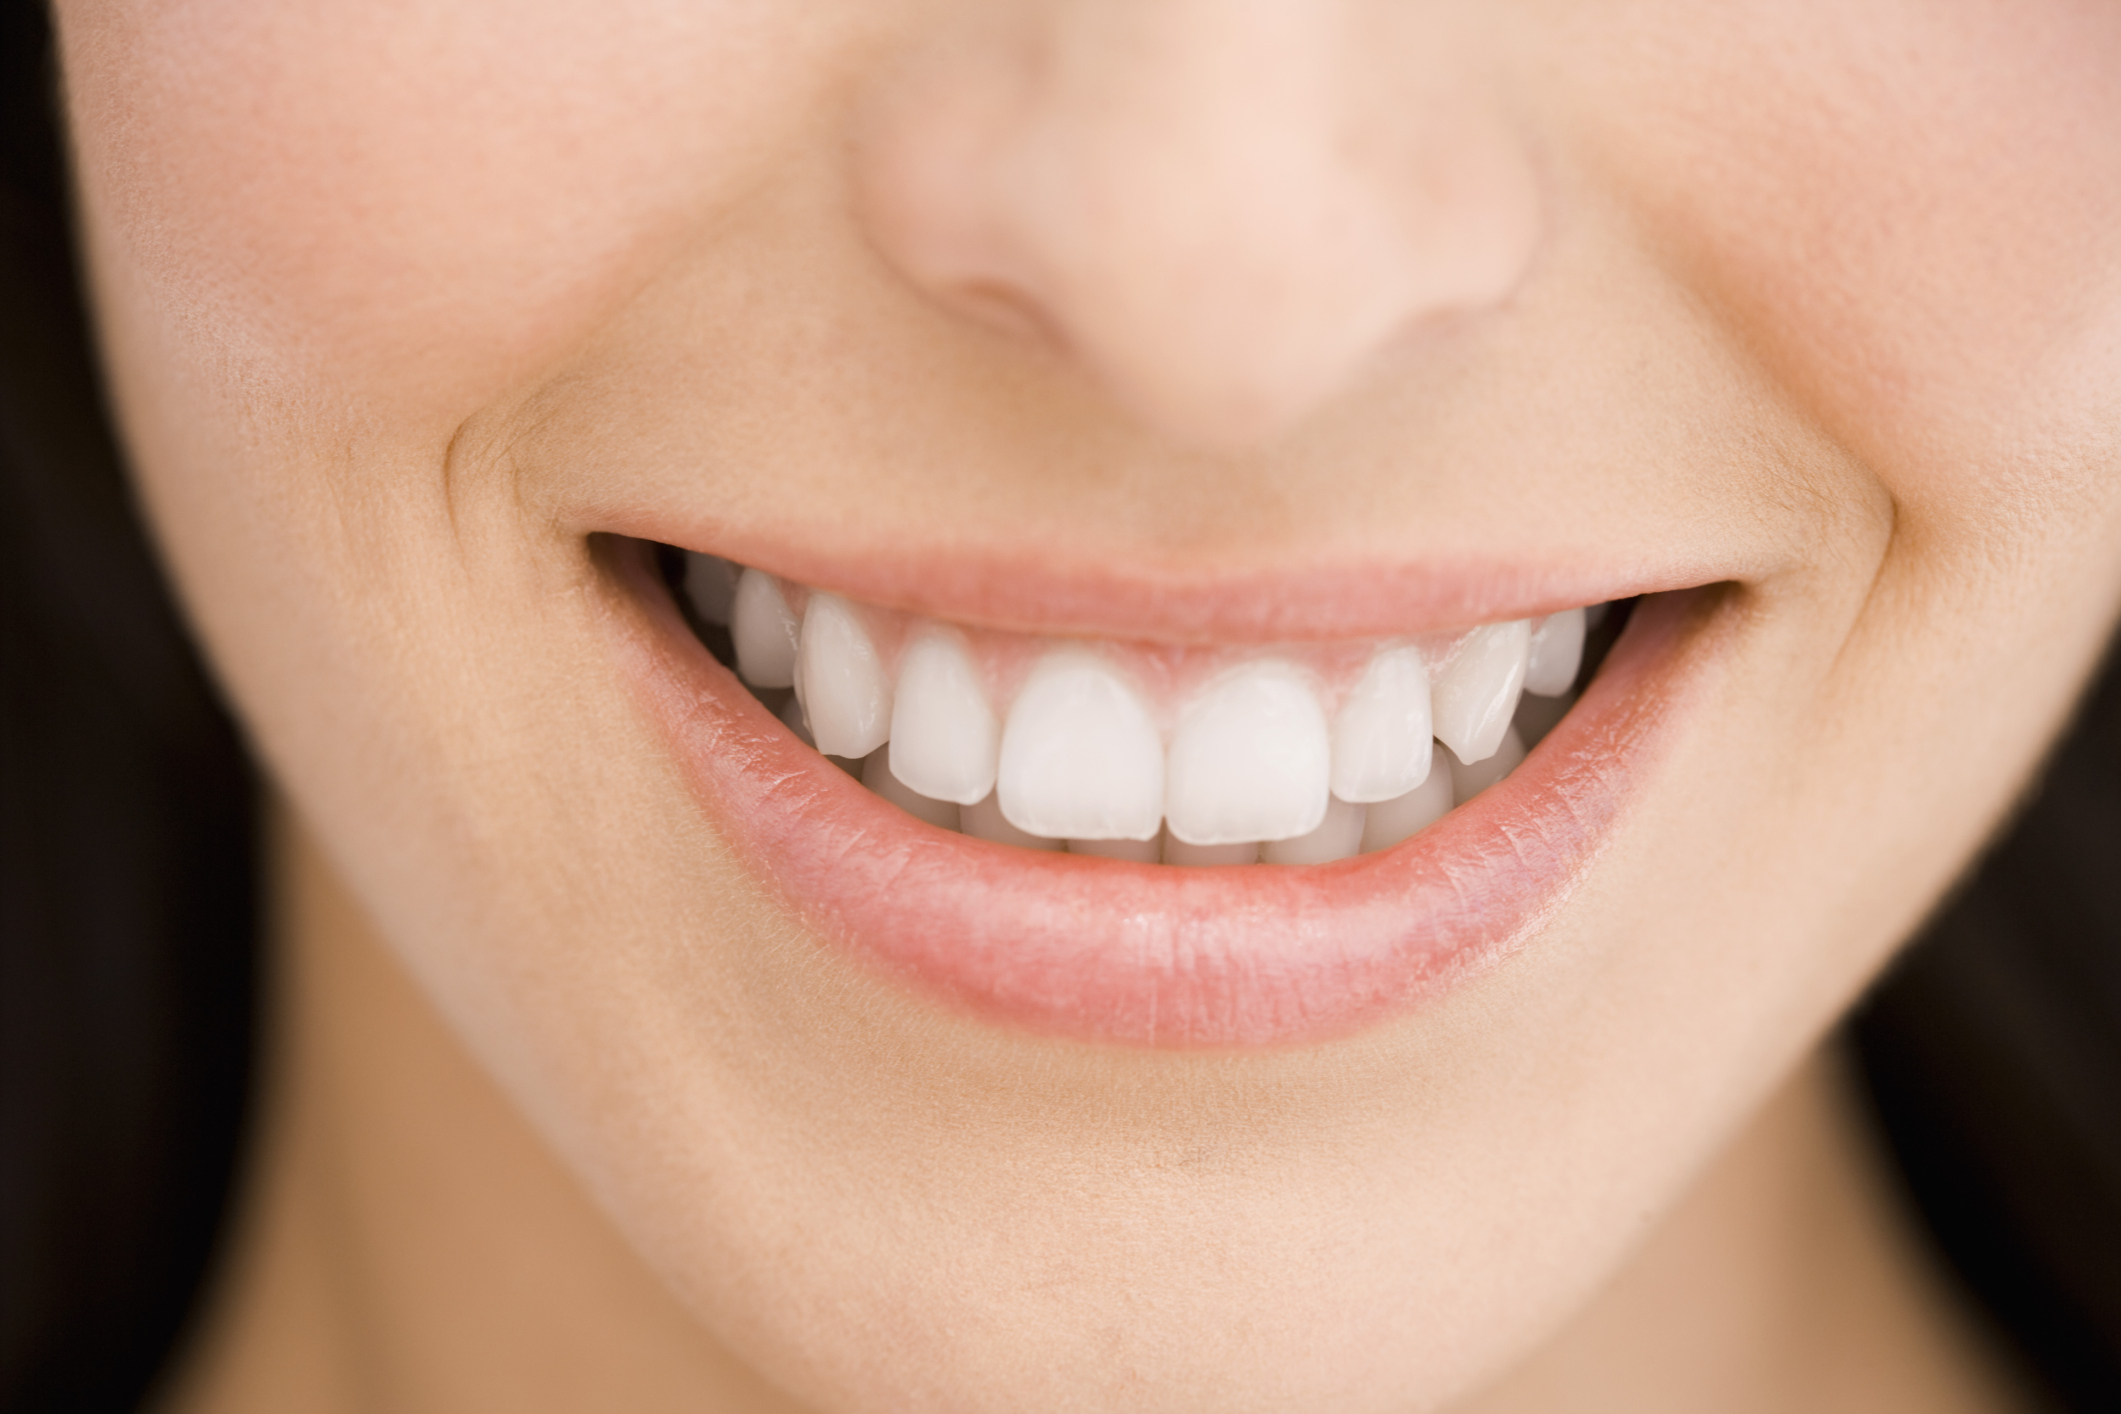 Foods to Eat to Get Whiter Teeth | Healthy Living